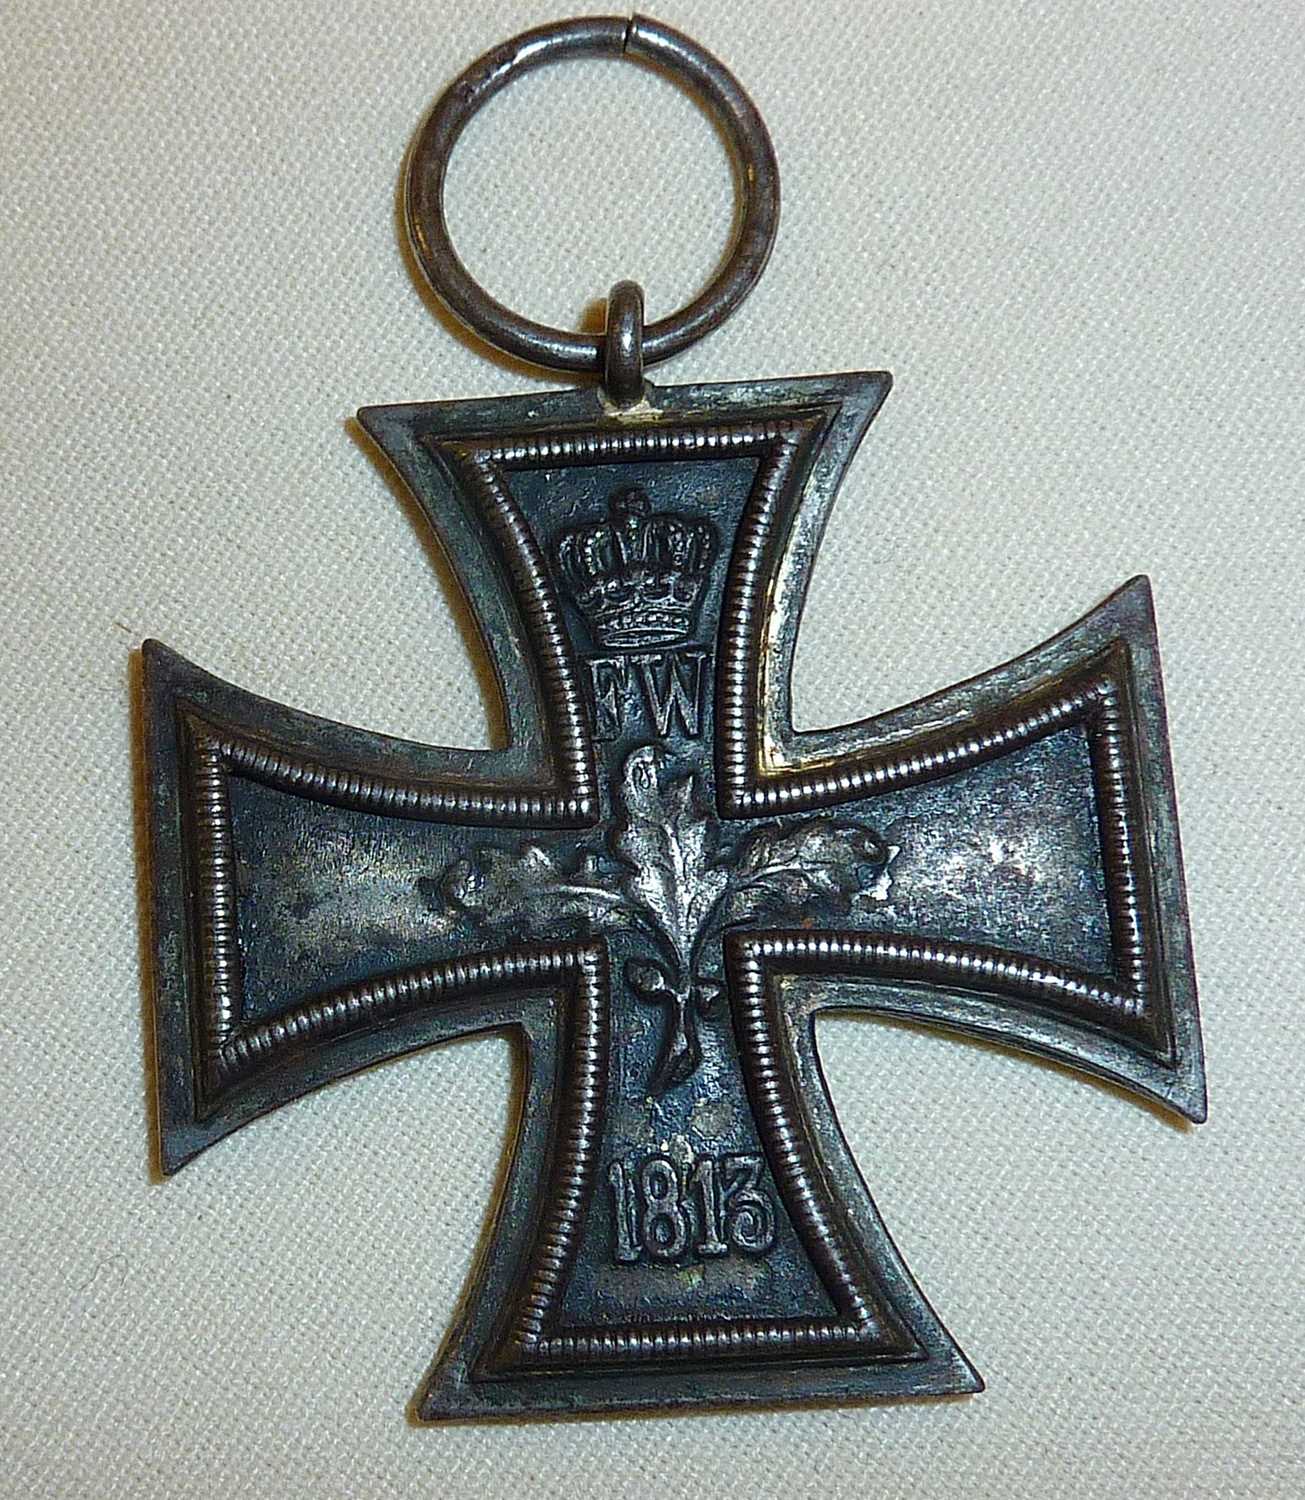 Vintage enamel and other badges, inc. a German Iron Cross medal - Image 3 of 4